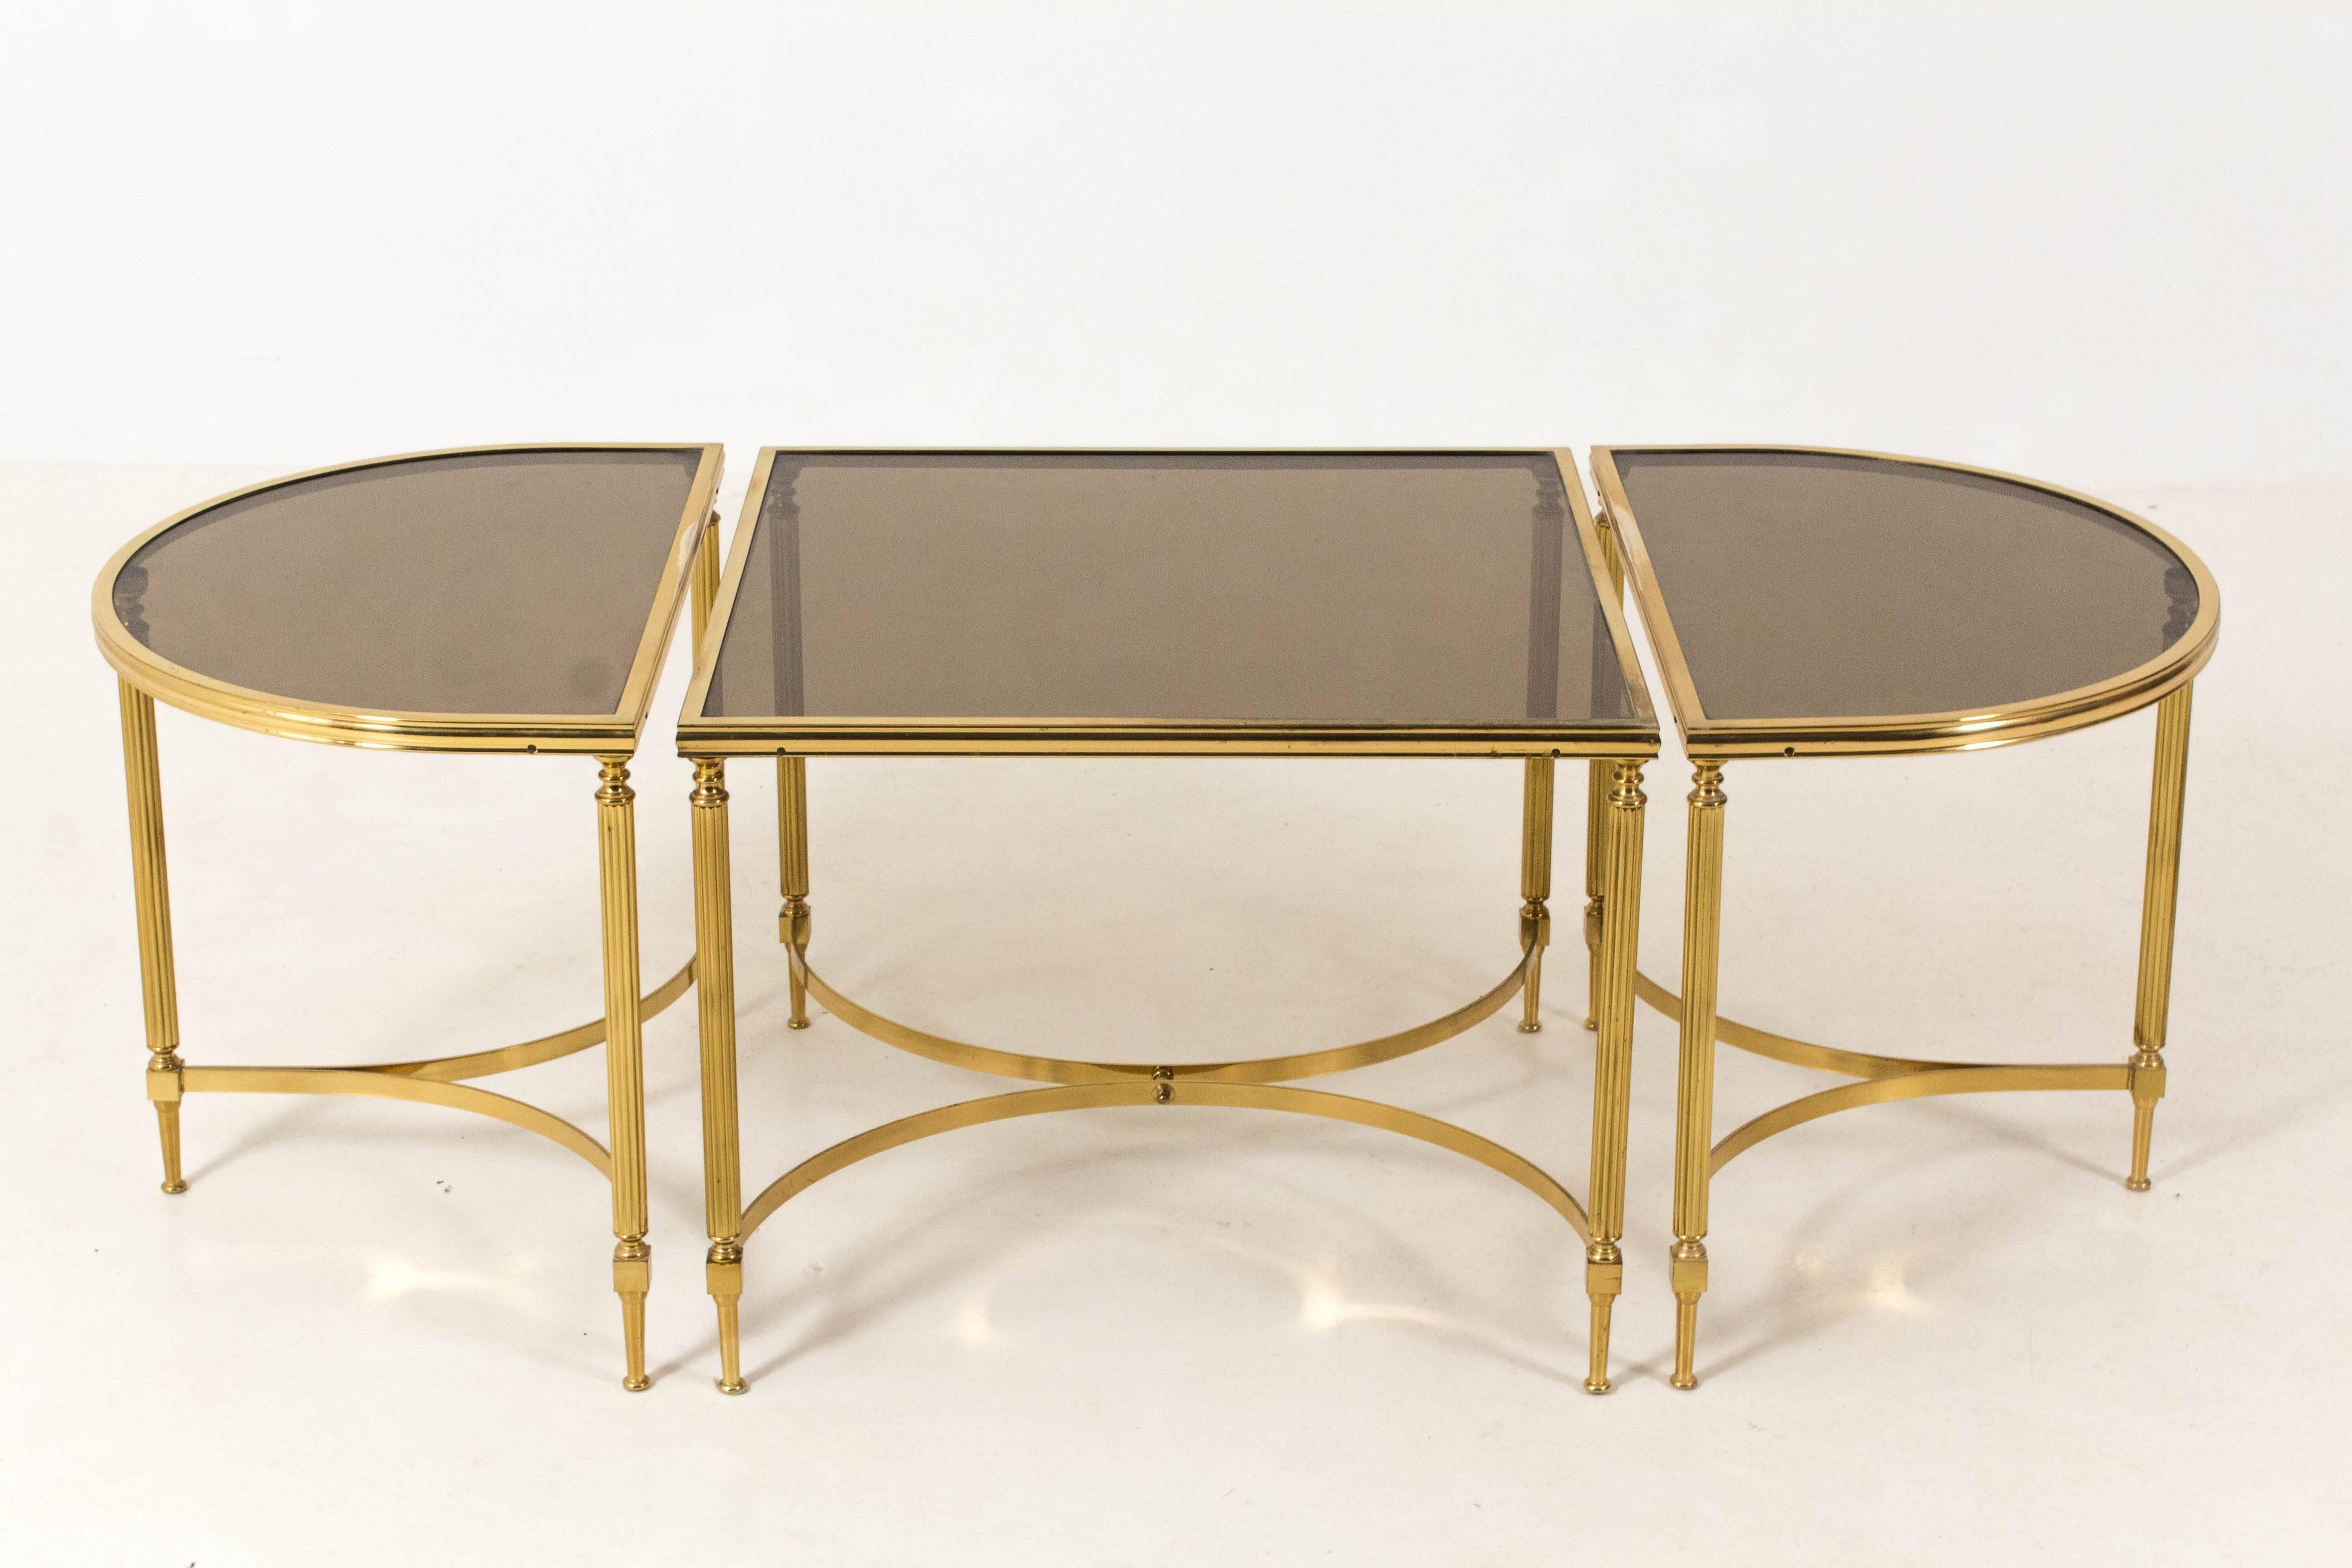 Stunning Hollywood Regency Maison Jansen three-piece cocktail table.
Solid brass frames with smoked glass tops.
In good original condition.
Measurements: Large table: 66 cm x 66 cm.
Measurements: oval table: 66 cm x 42.5 cm.